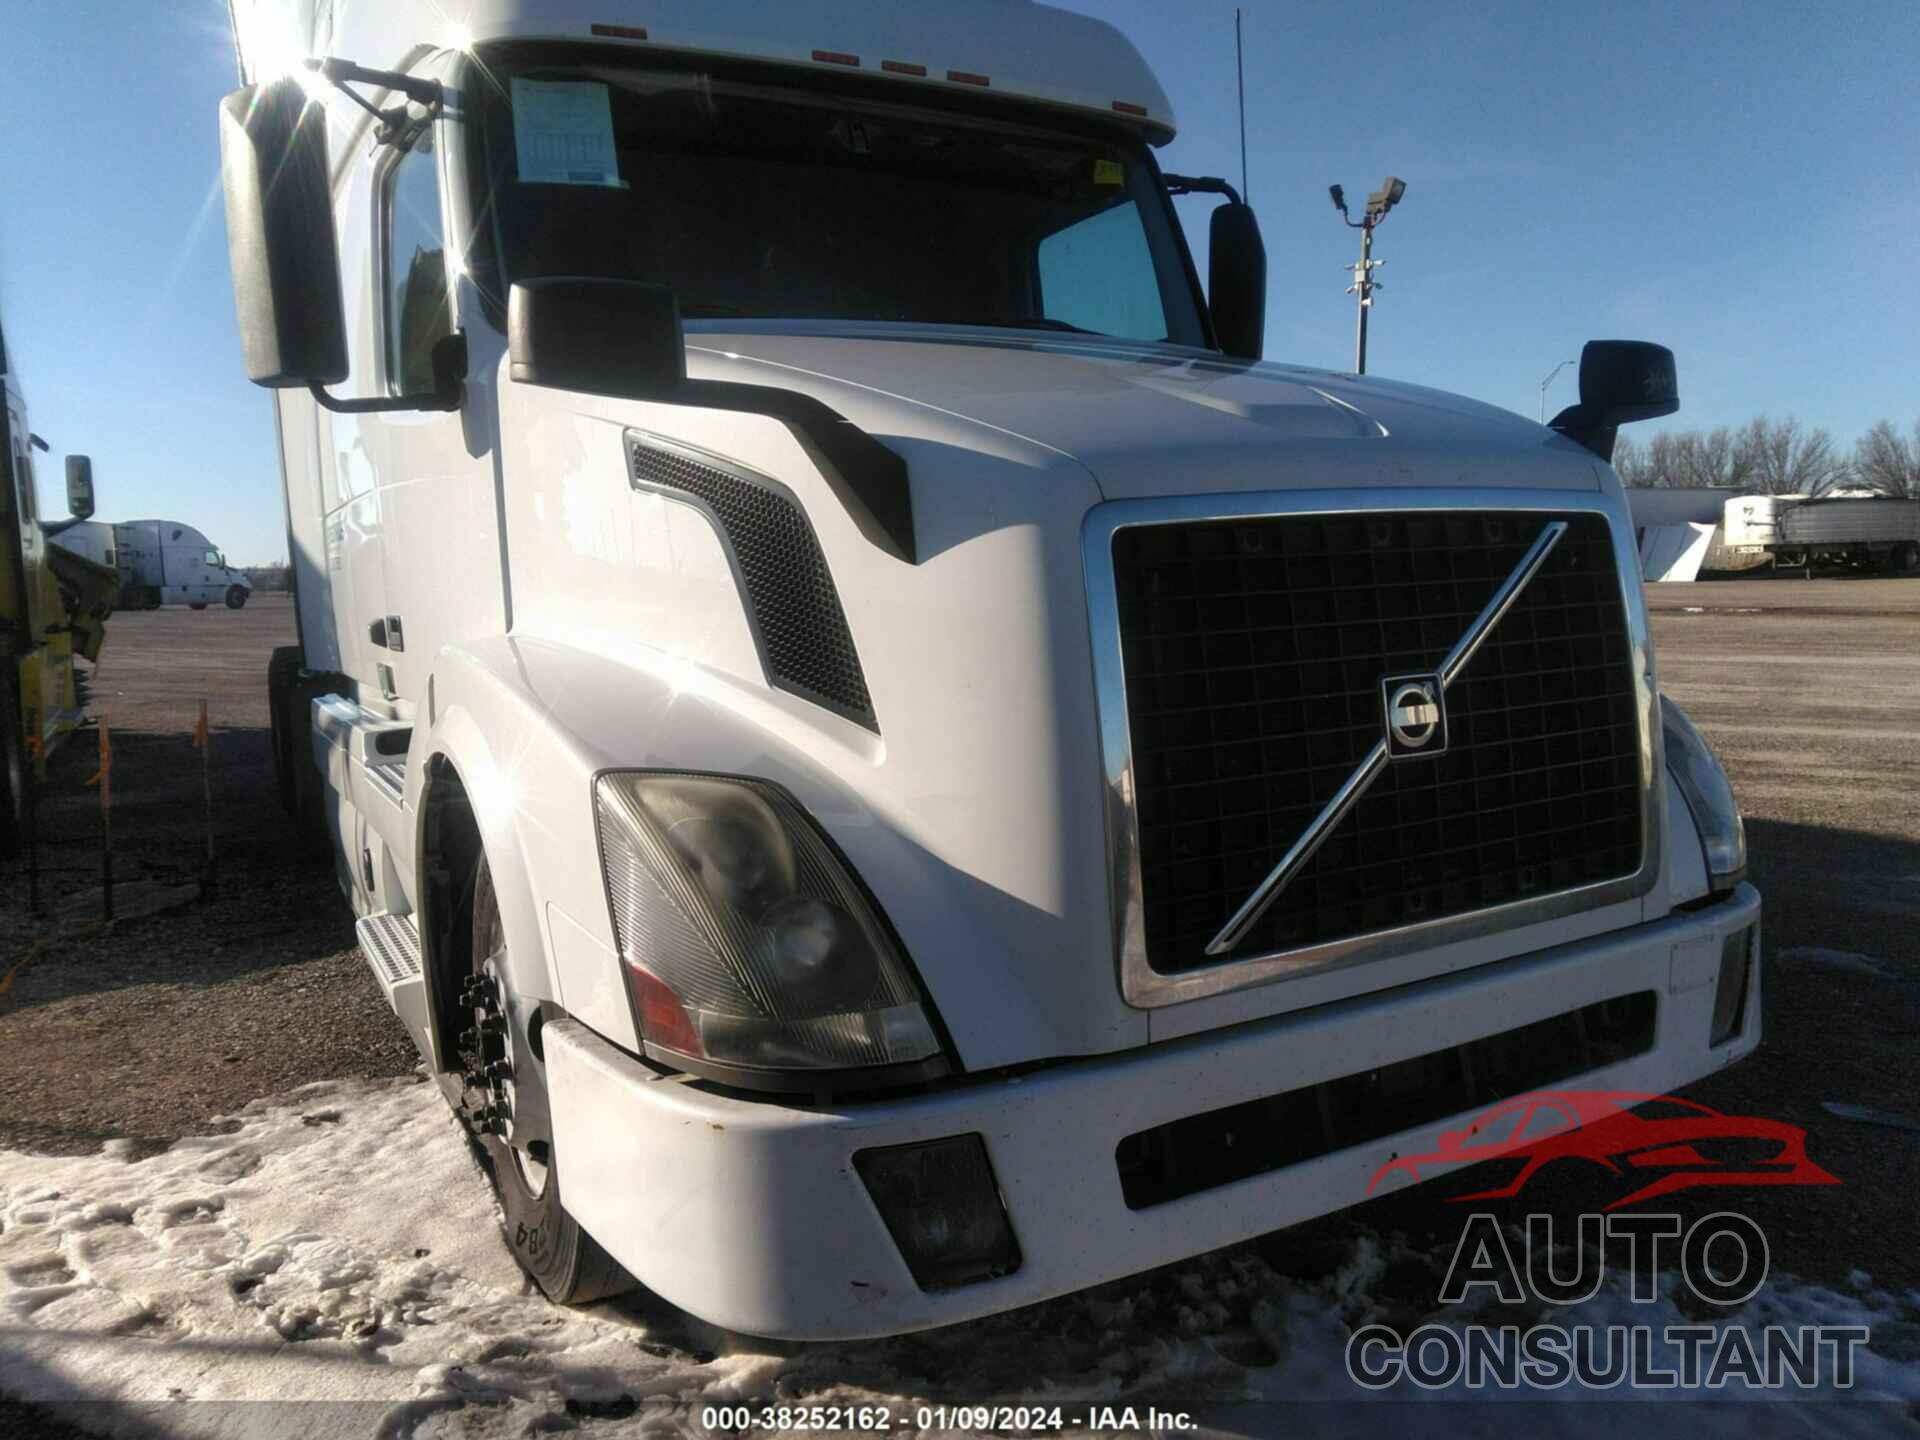 VOLVO VN 2016 - 4V4NC9EH8GN953783